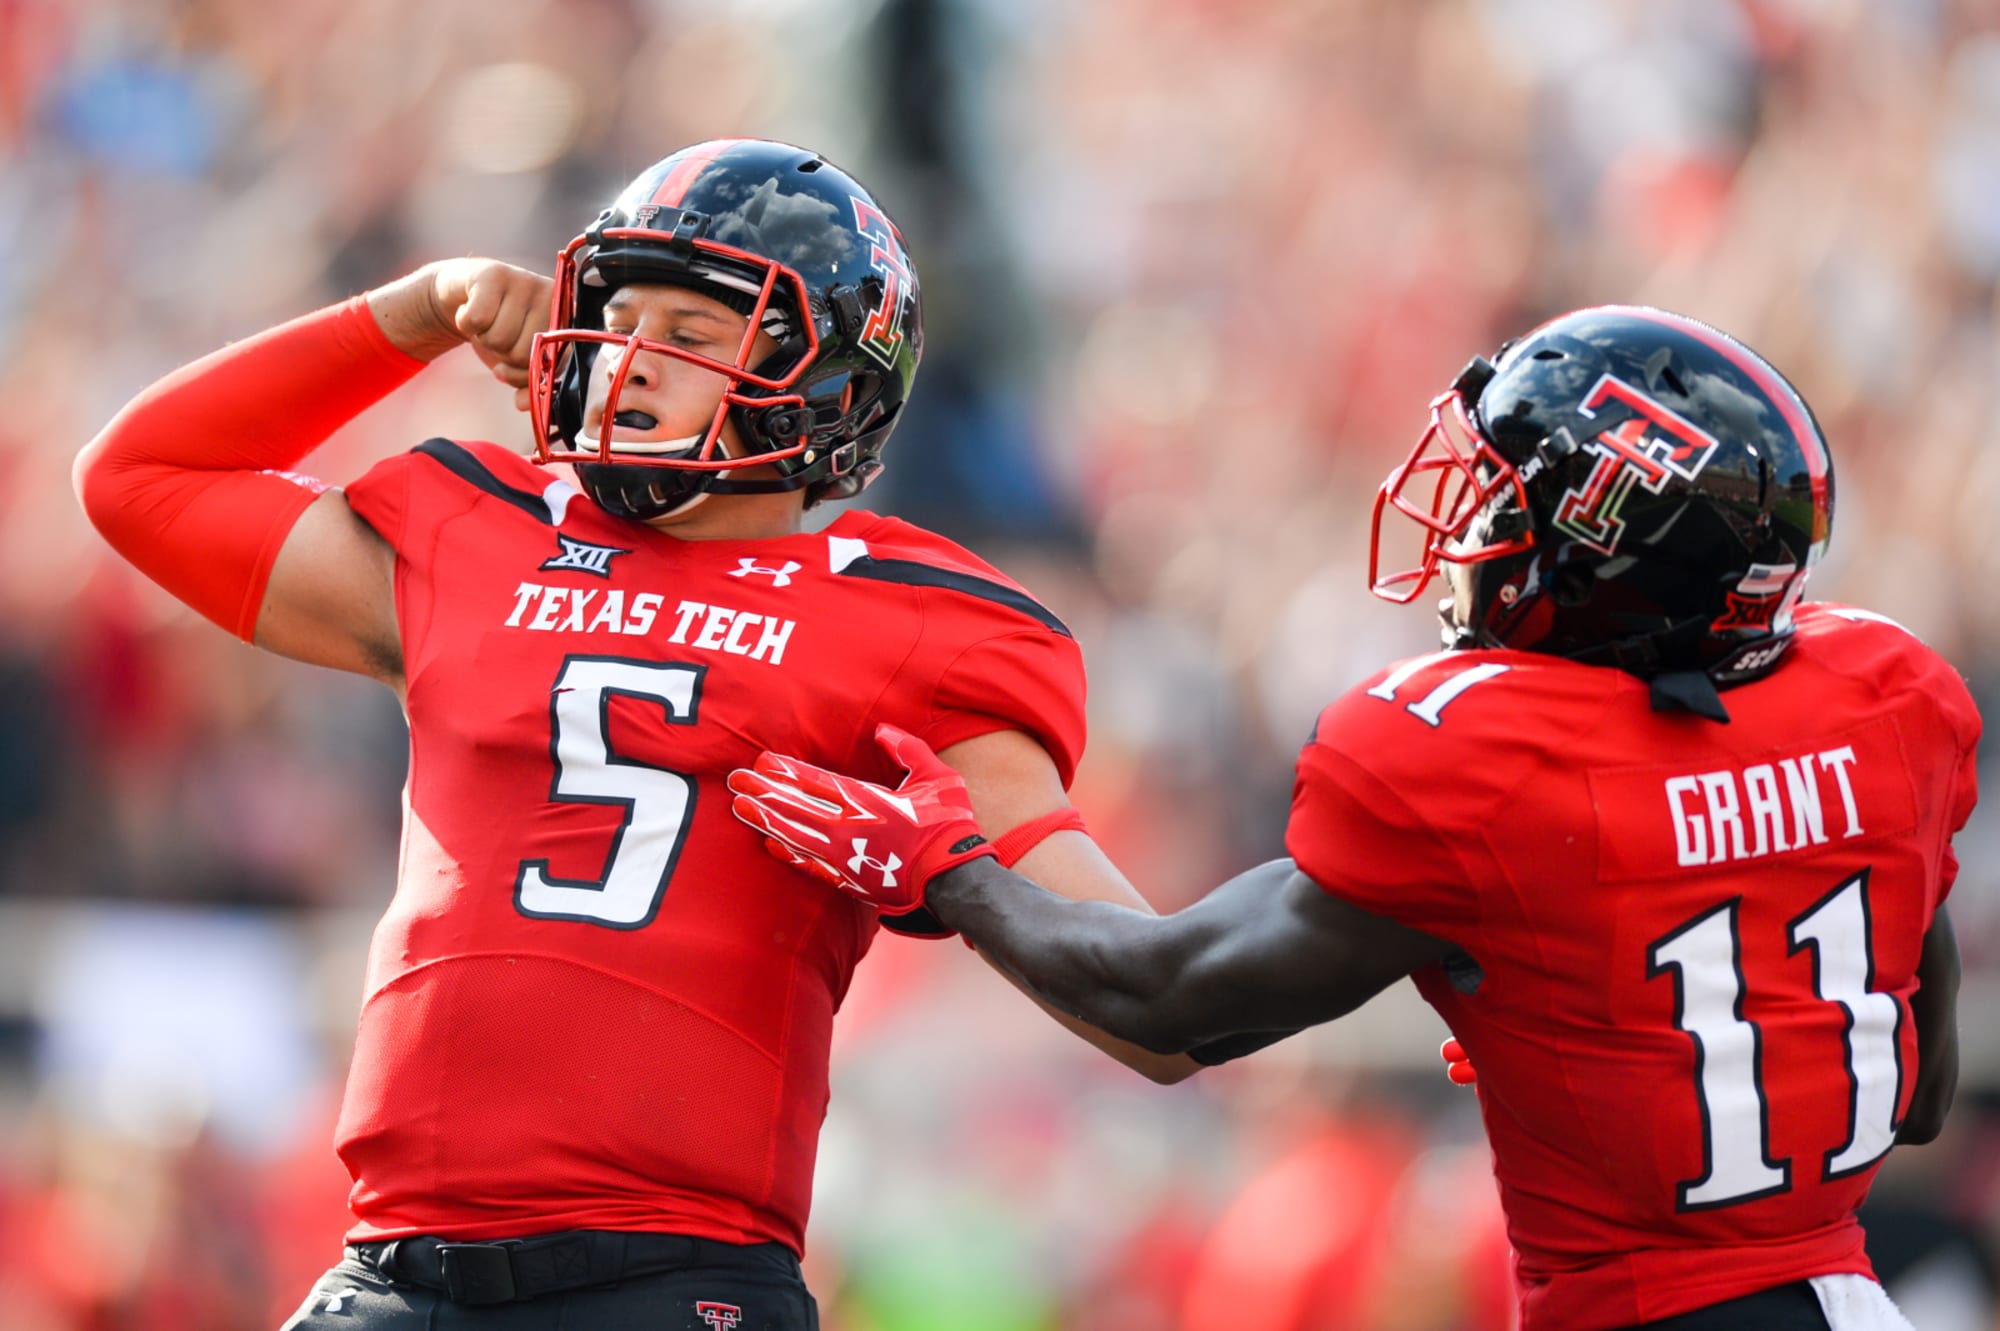 SportsCenter - From high school, to Texas Tech Football, to a